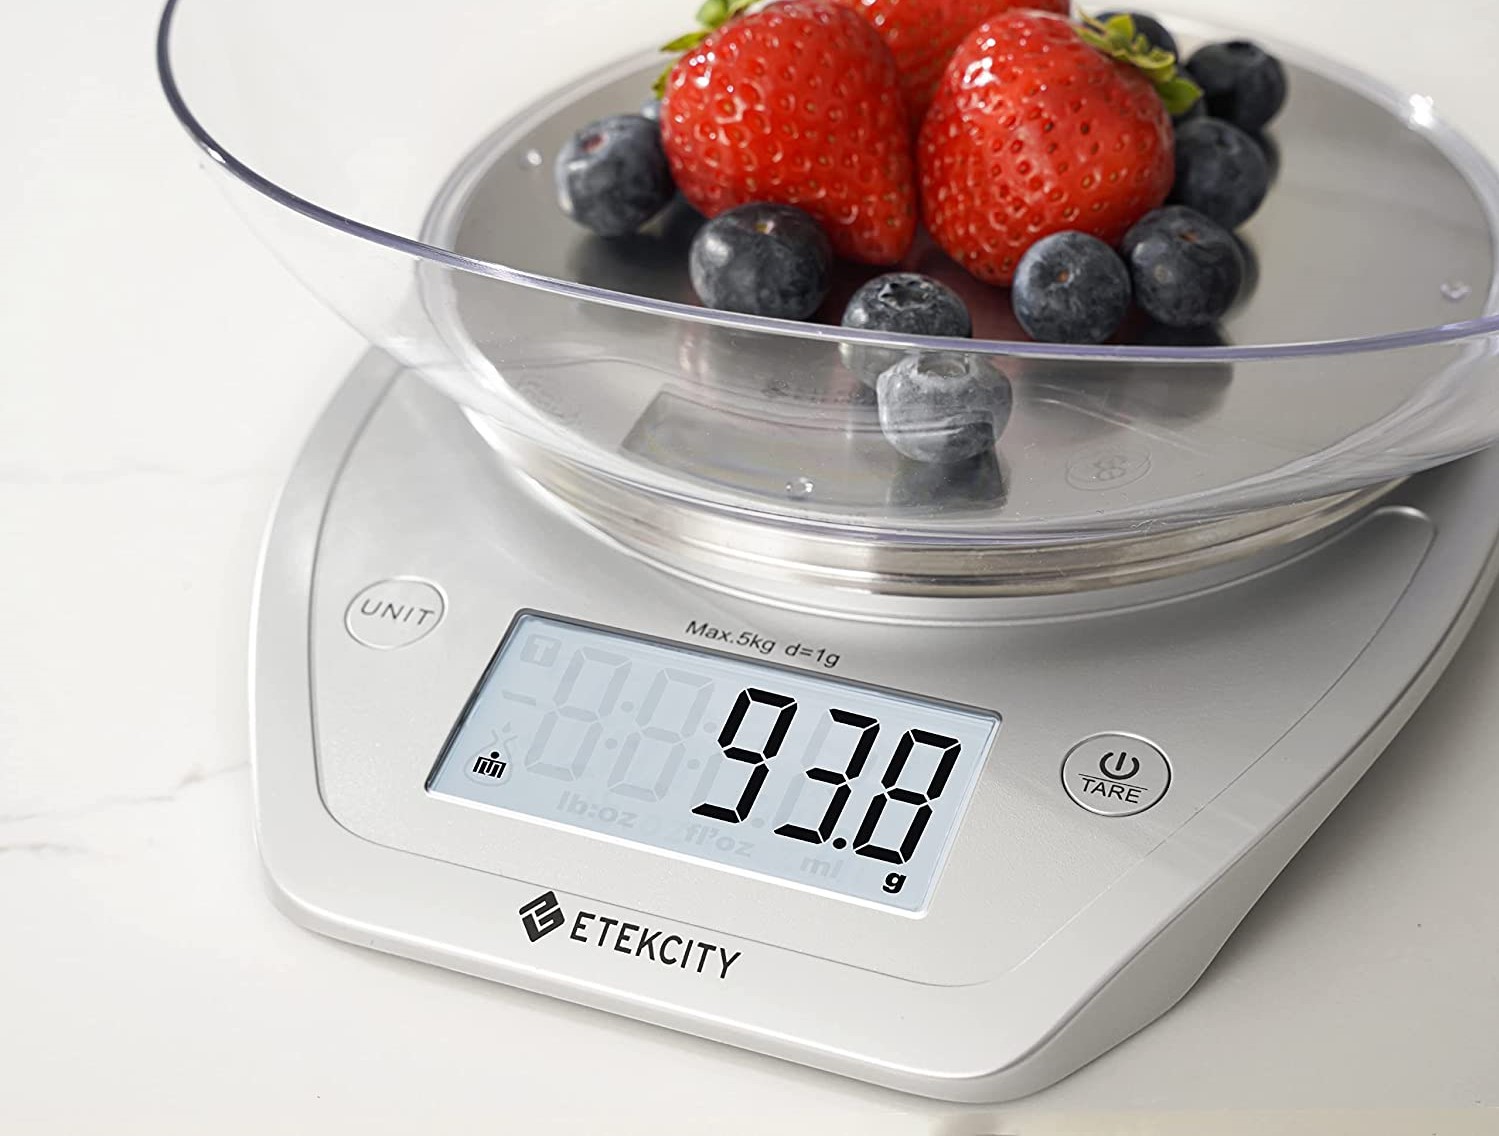 Etekcity Food Kitchen Scale, Digital Weight Grams and Oz for Cooking, Baking,  Me